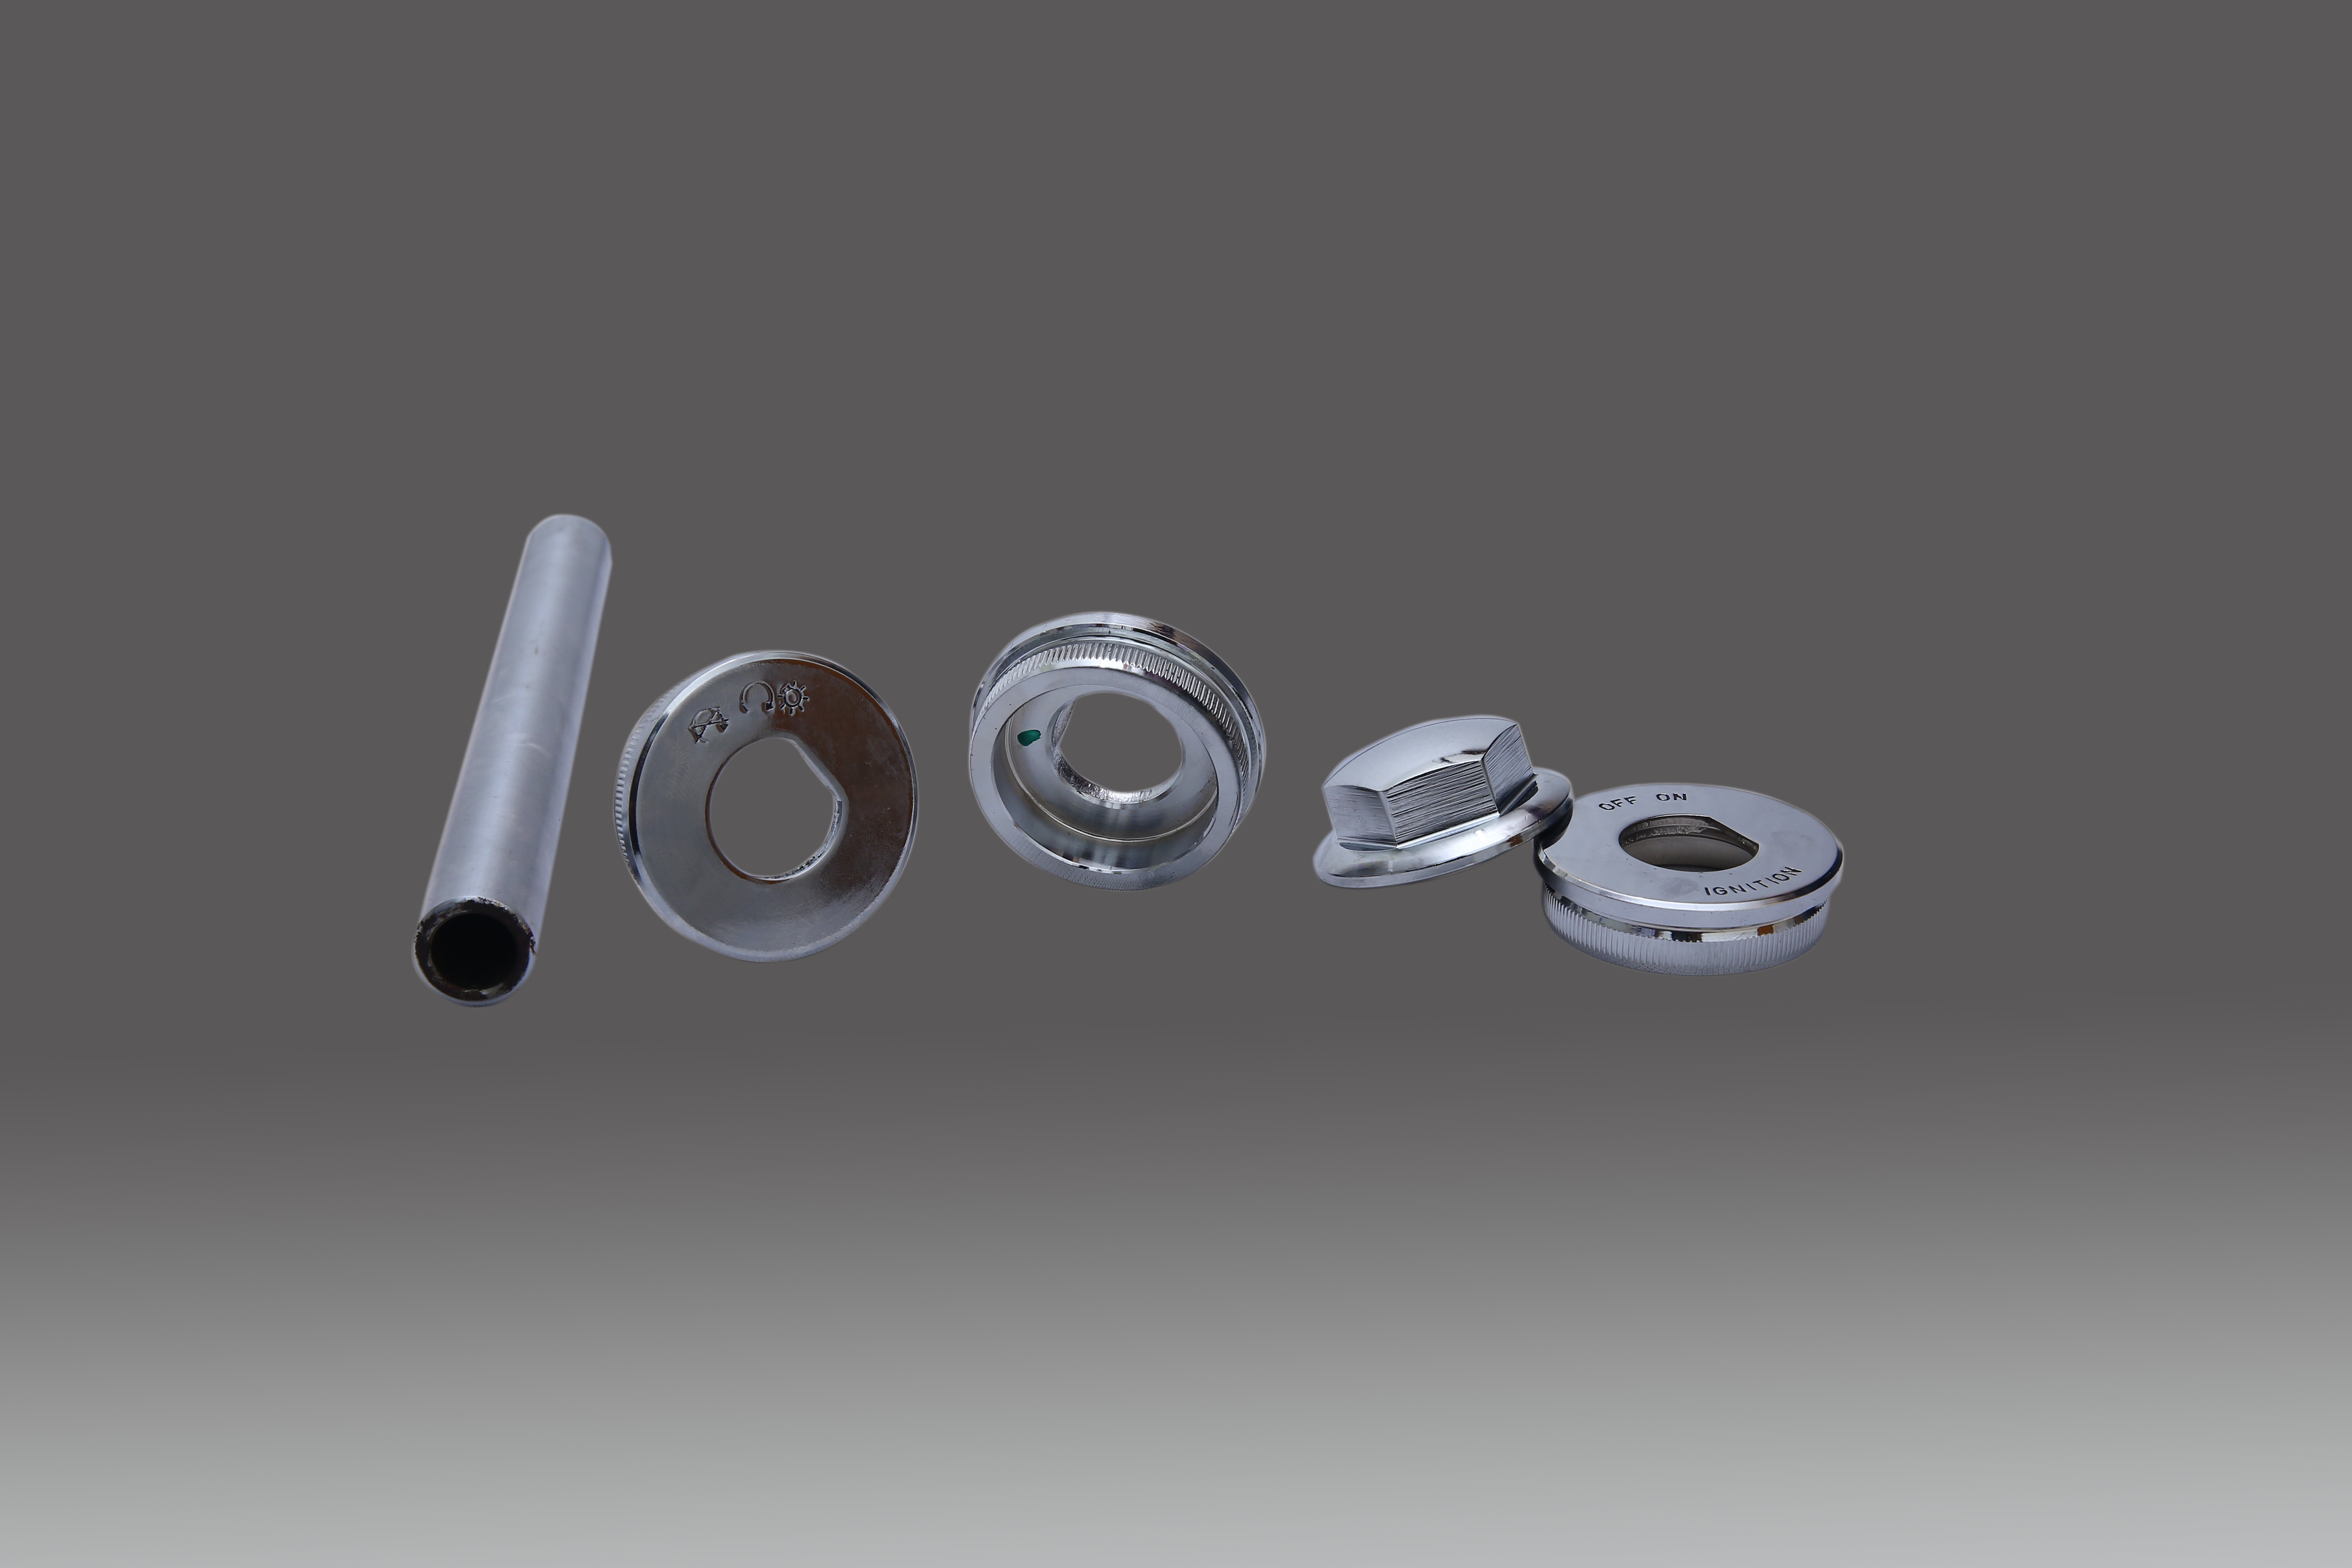 Handle bar assembly